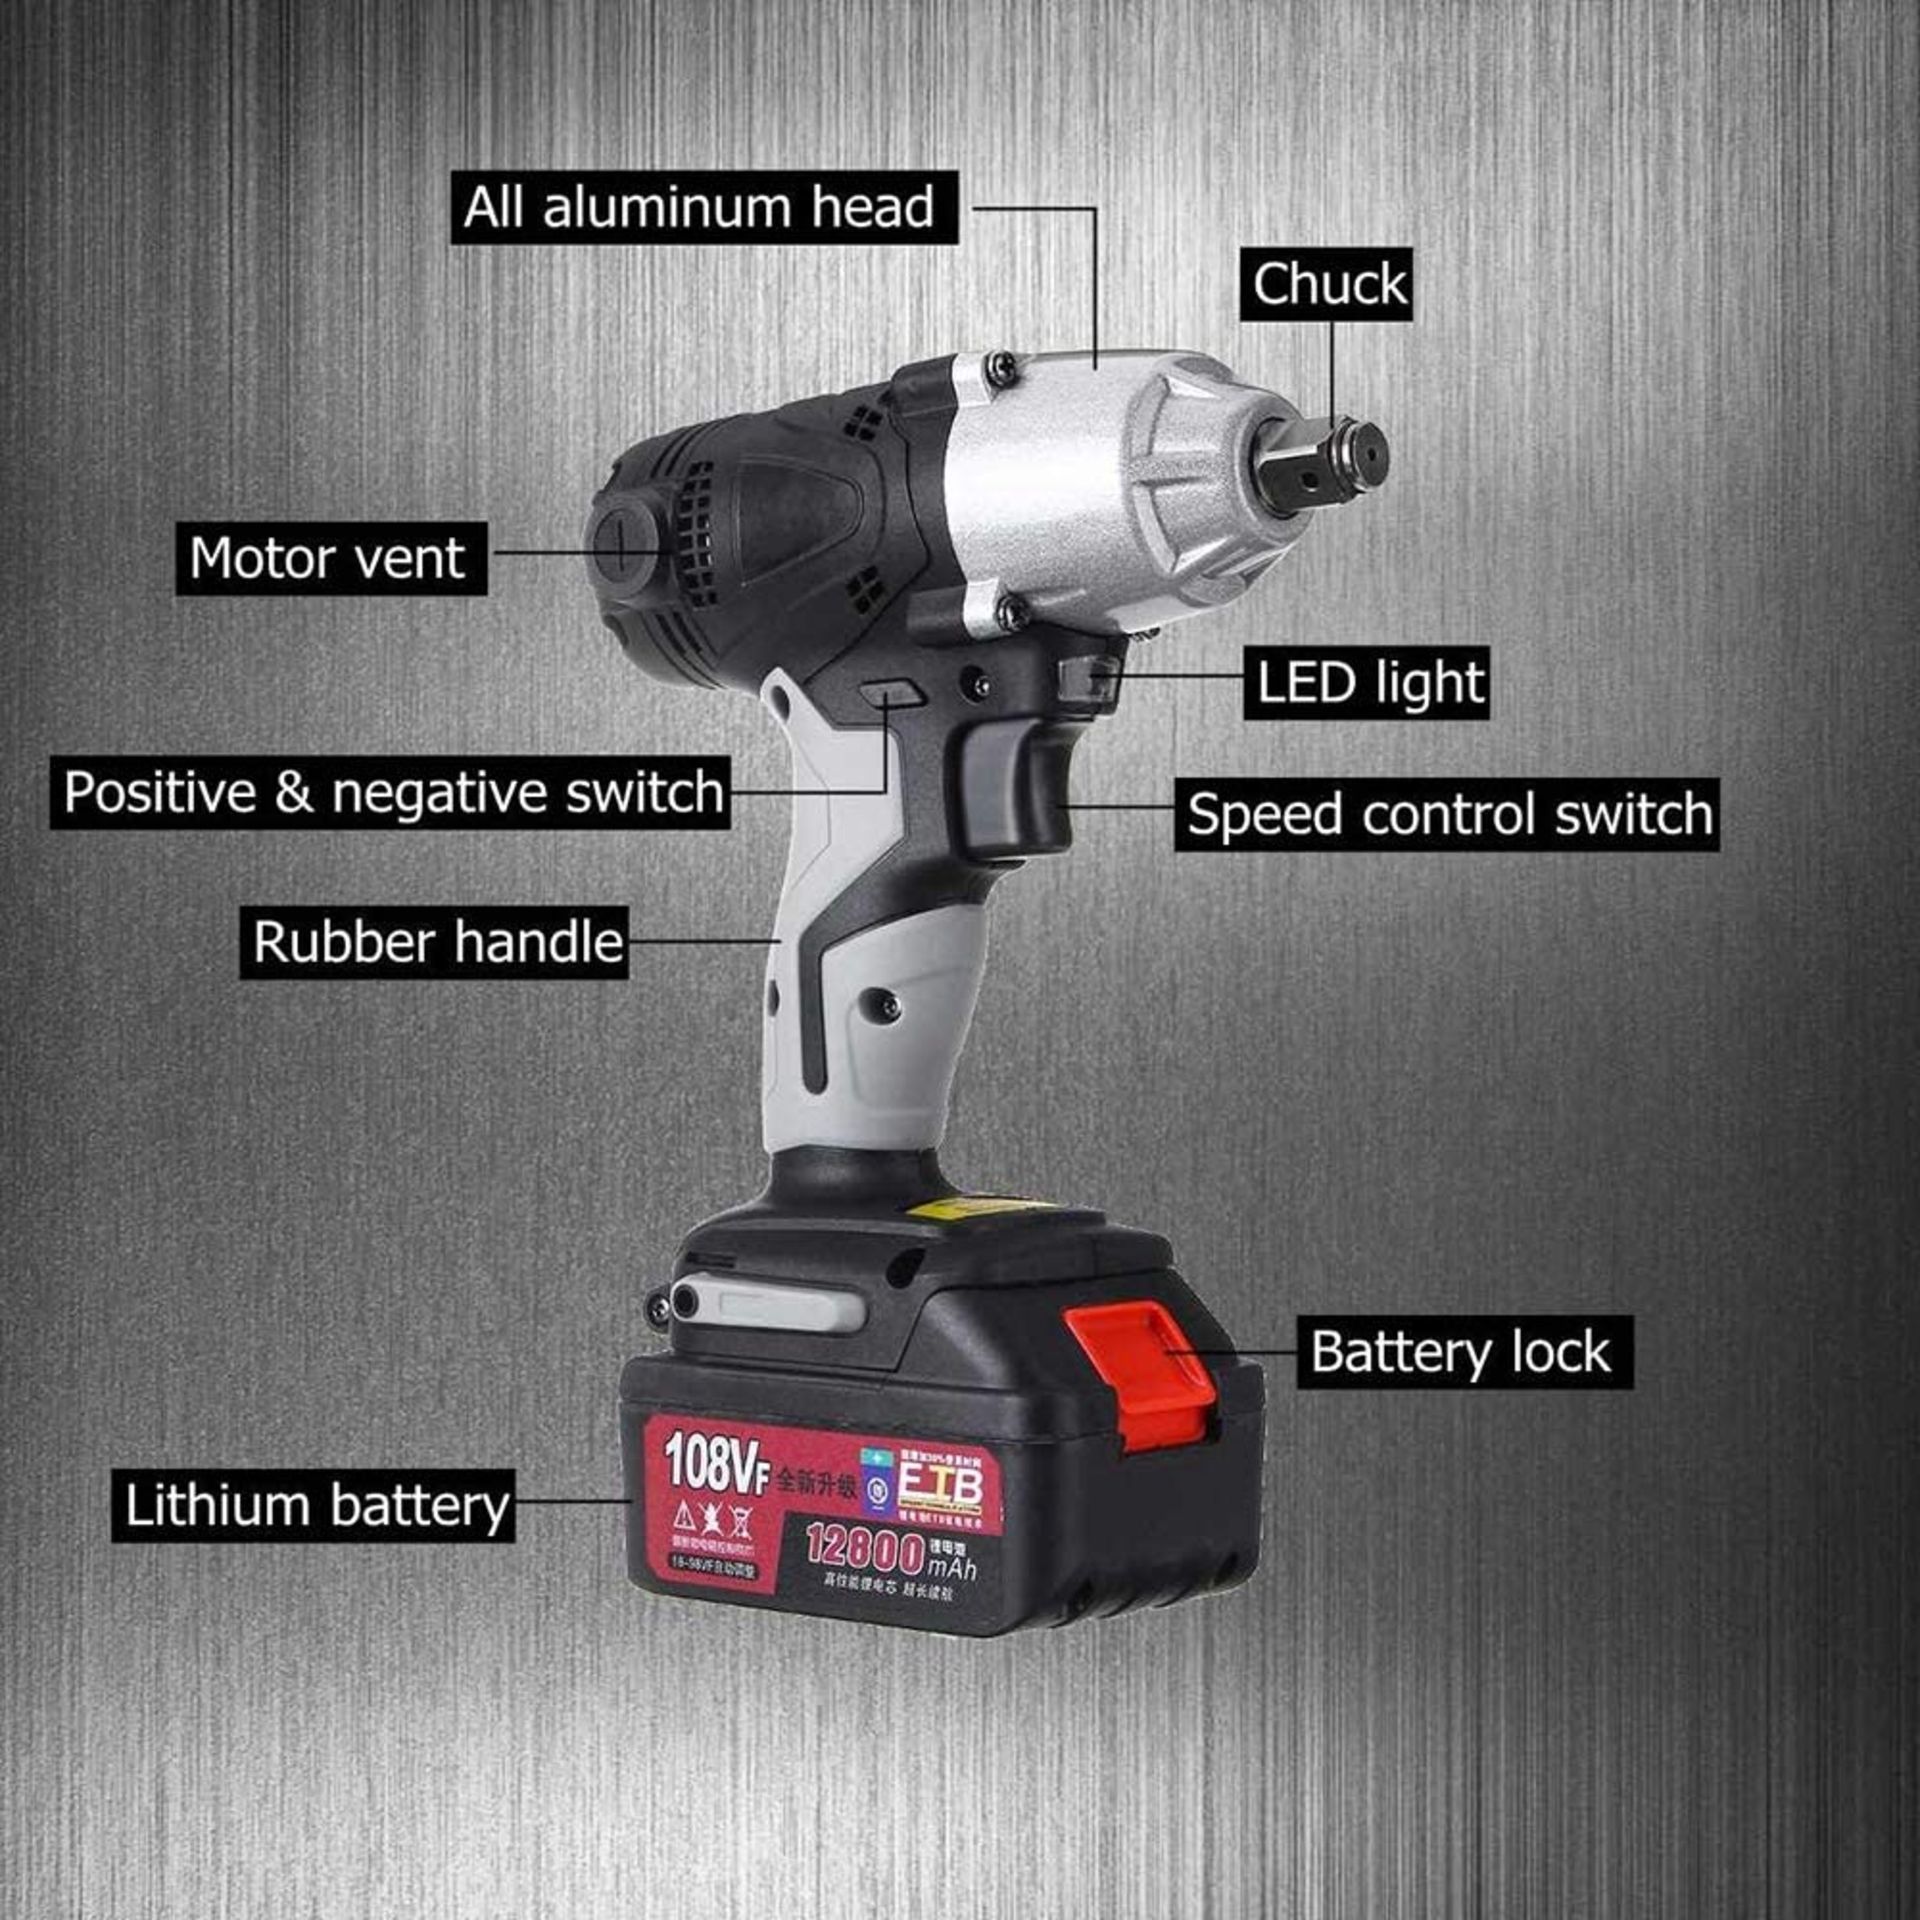 108Vf 12800Mah Cordless Electric Impact Wrench Drill Driver W/ Lithium-Ion Battery - Image 4 of 4